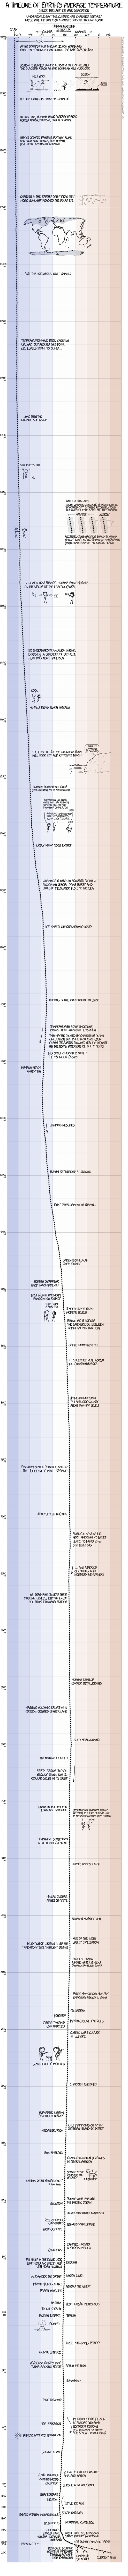 From XKCD: "[After setting your car on fire] The car's temperature has changed before"